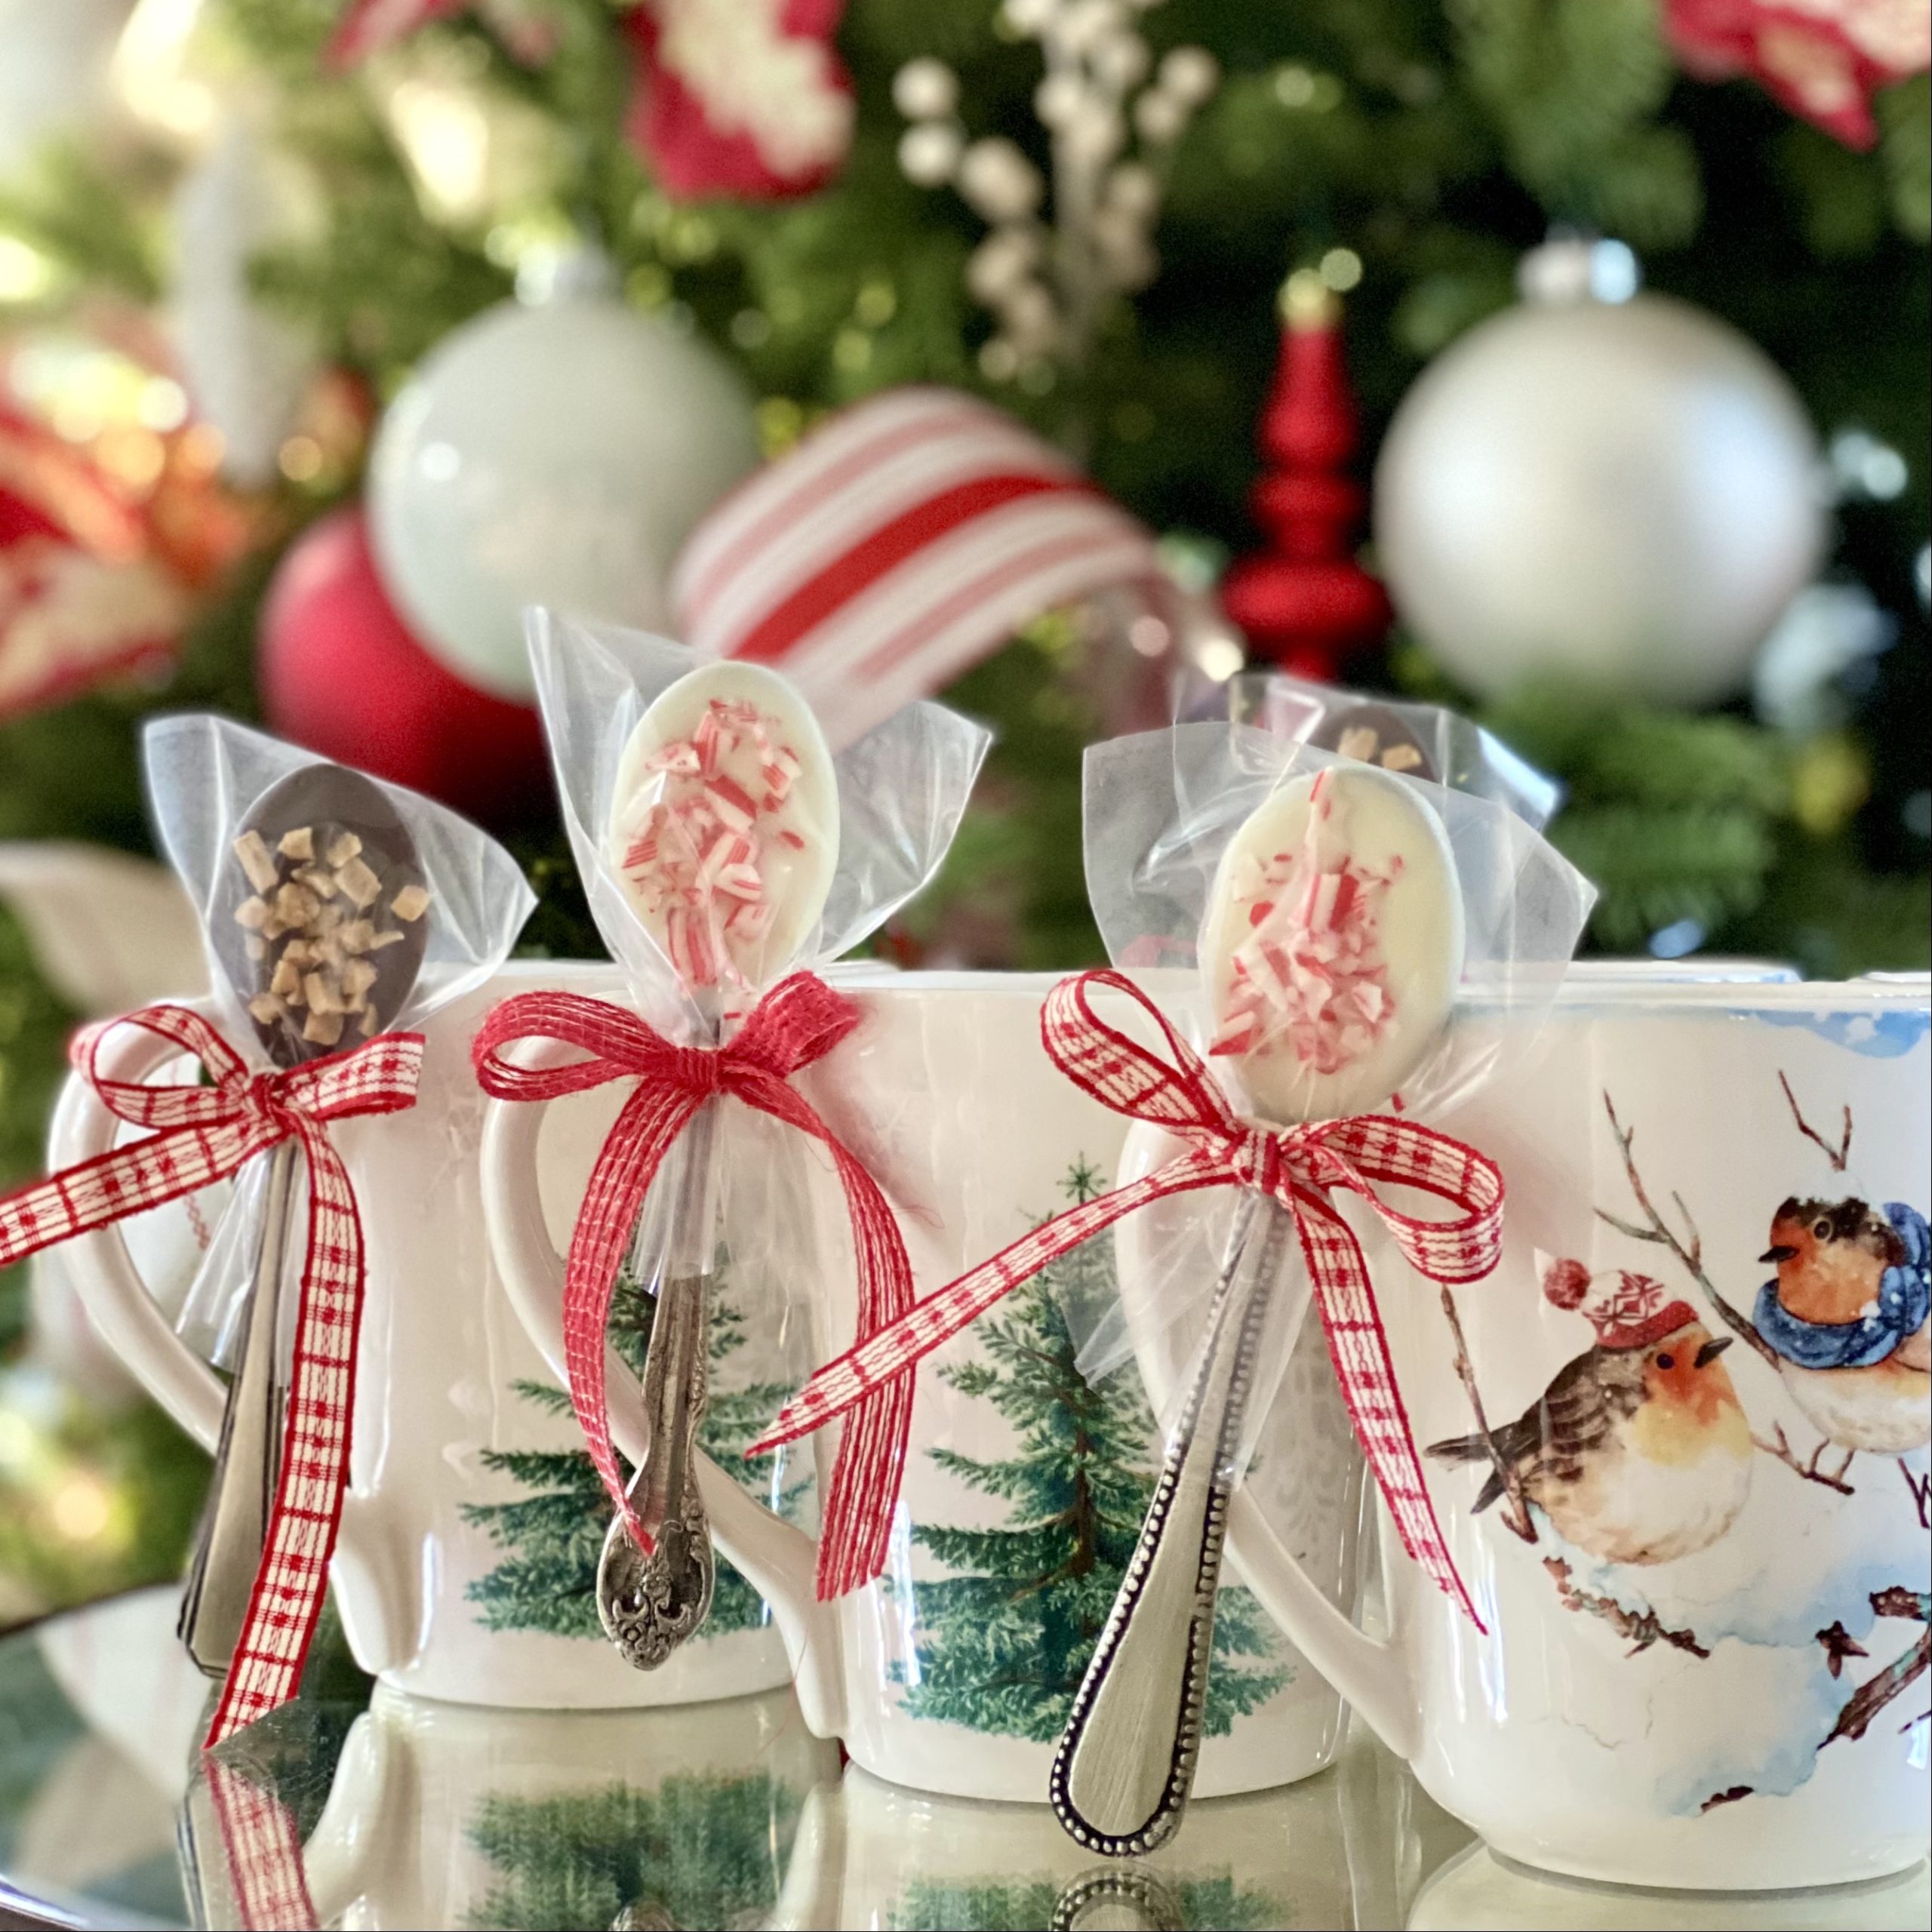 Chocolate dipped spoons tied to Christmas mugs in front of a Christmas tree.